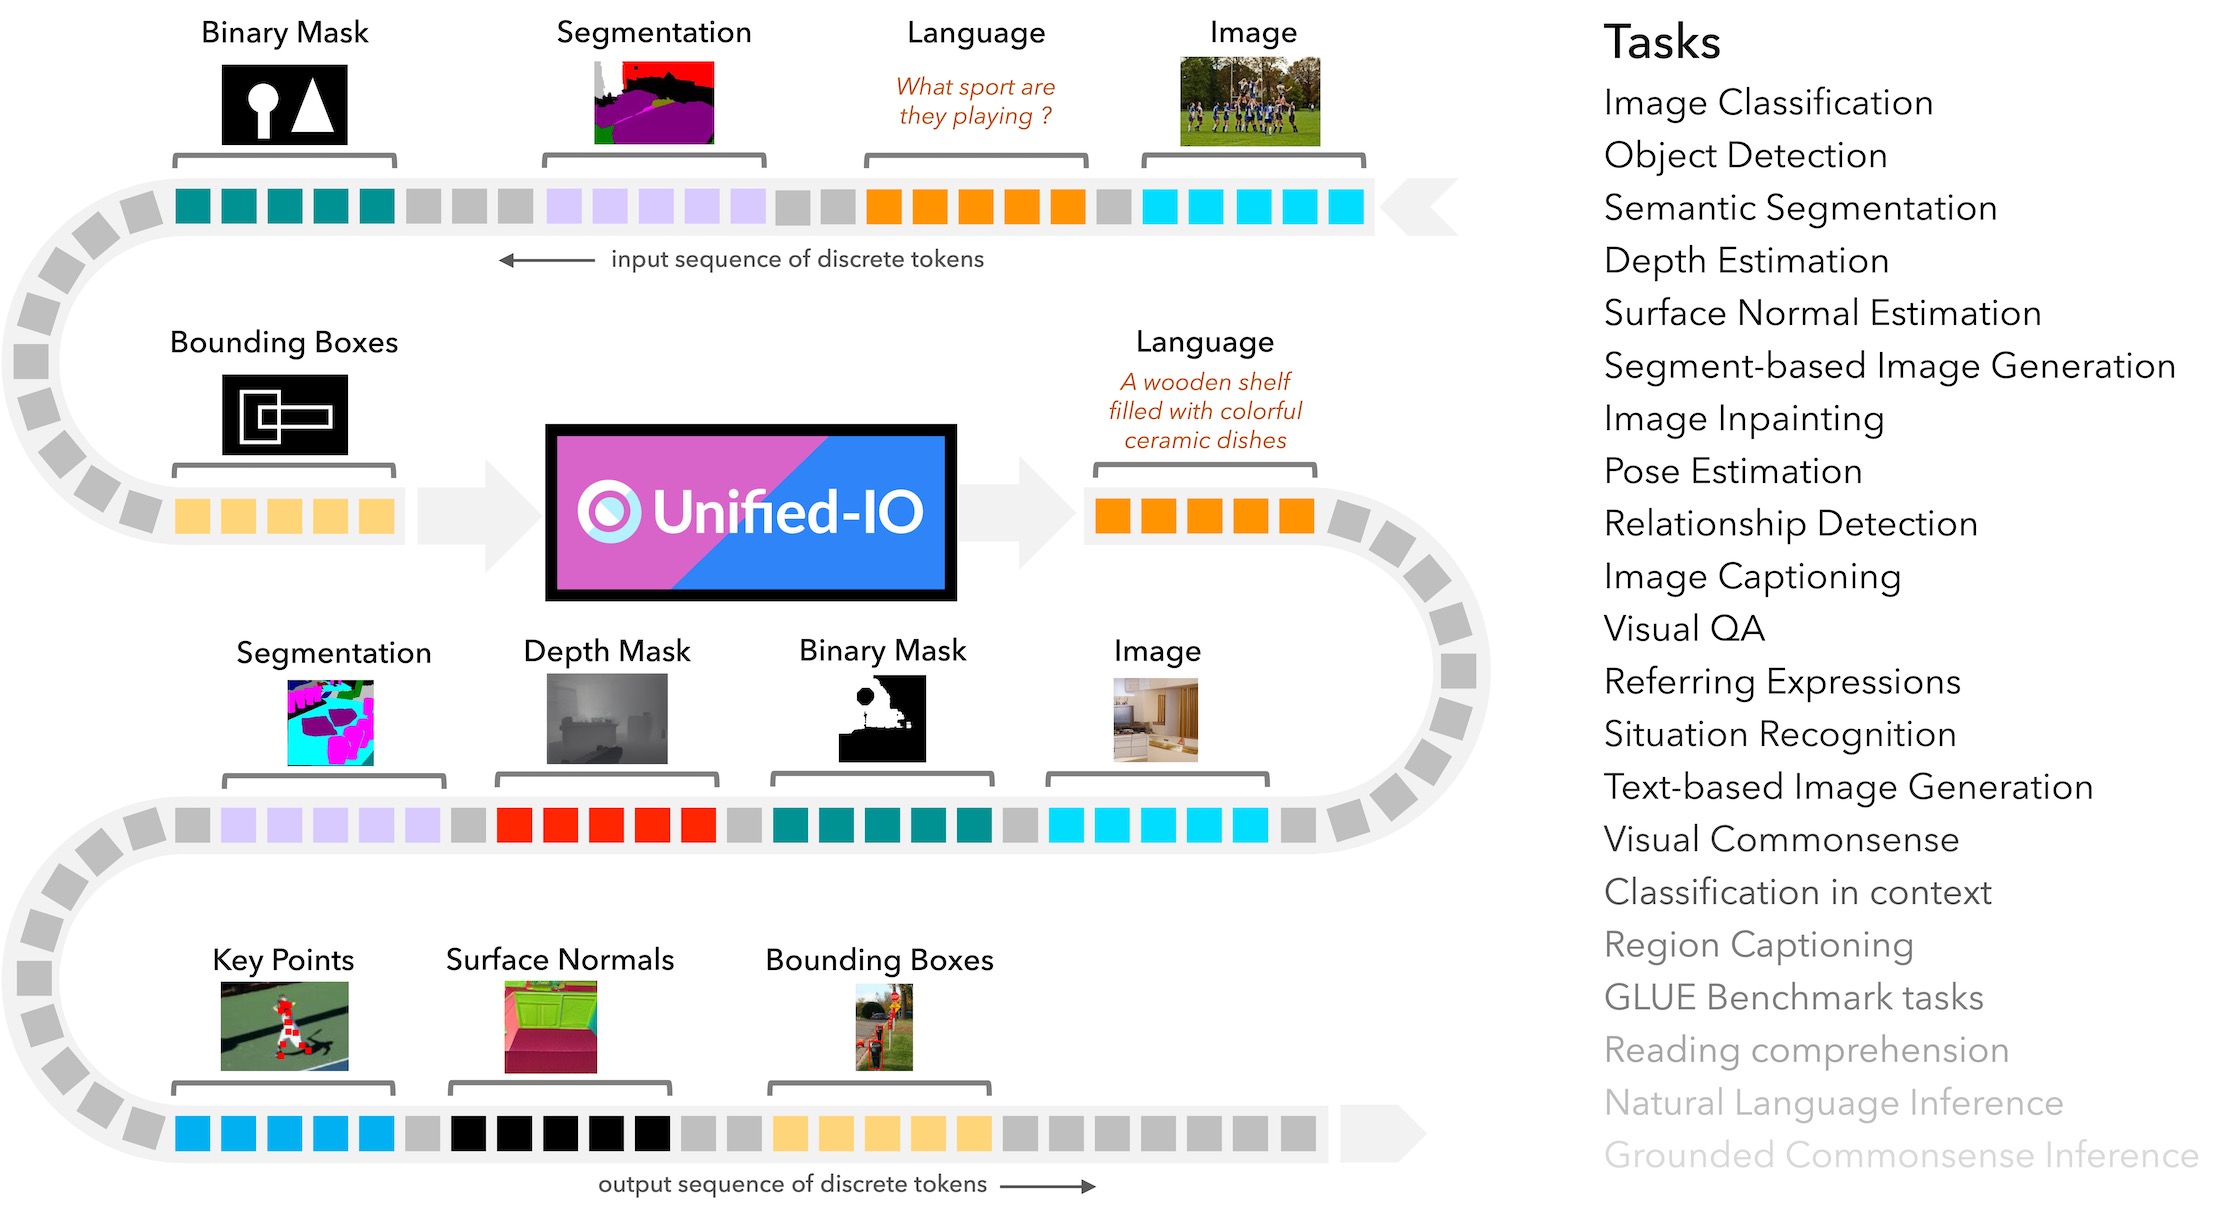 Unified-IO: A Unified Model for Vision, Language, and Multi-Modal Tasks